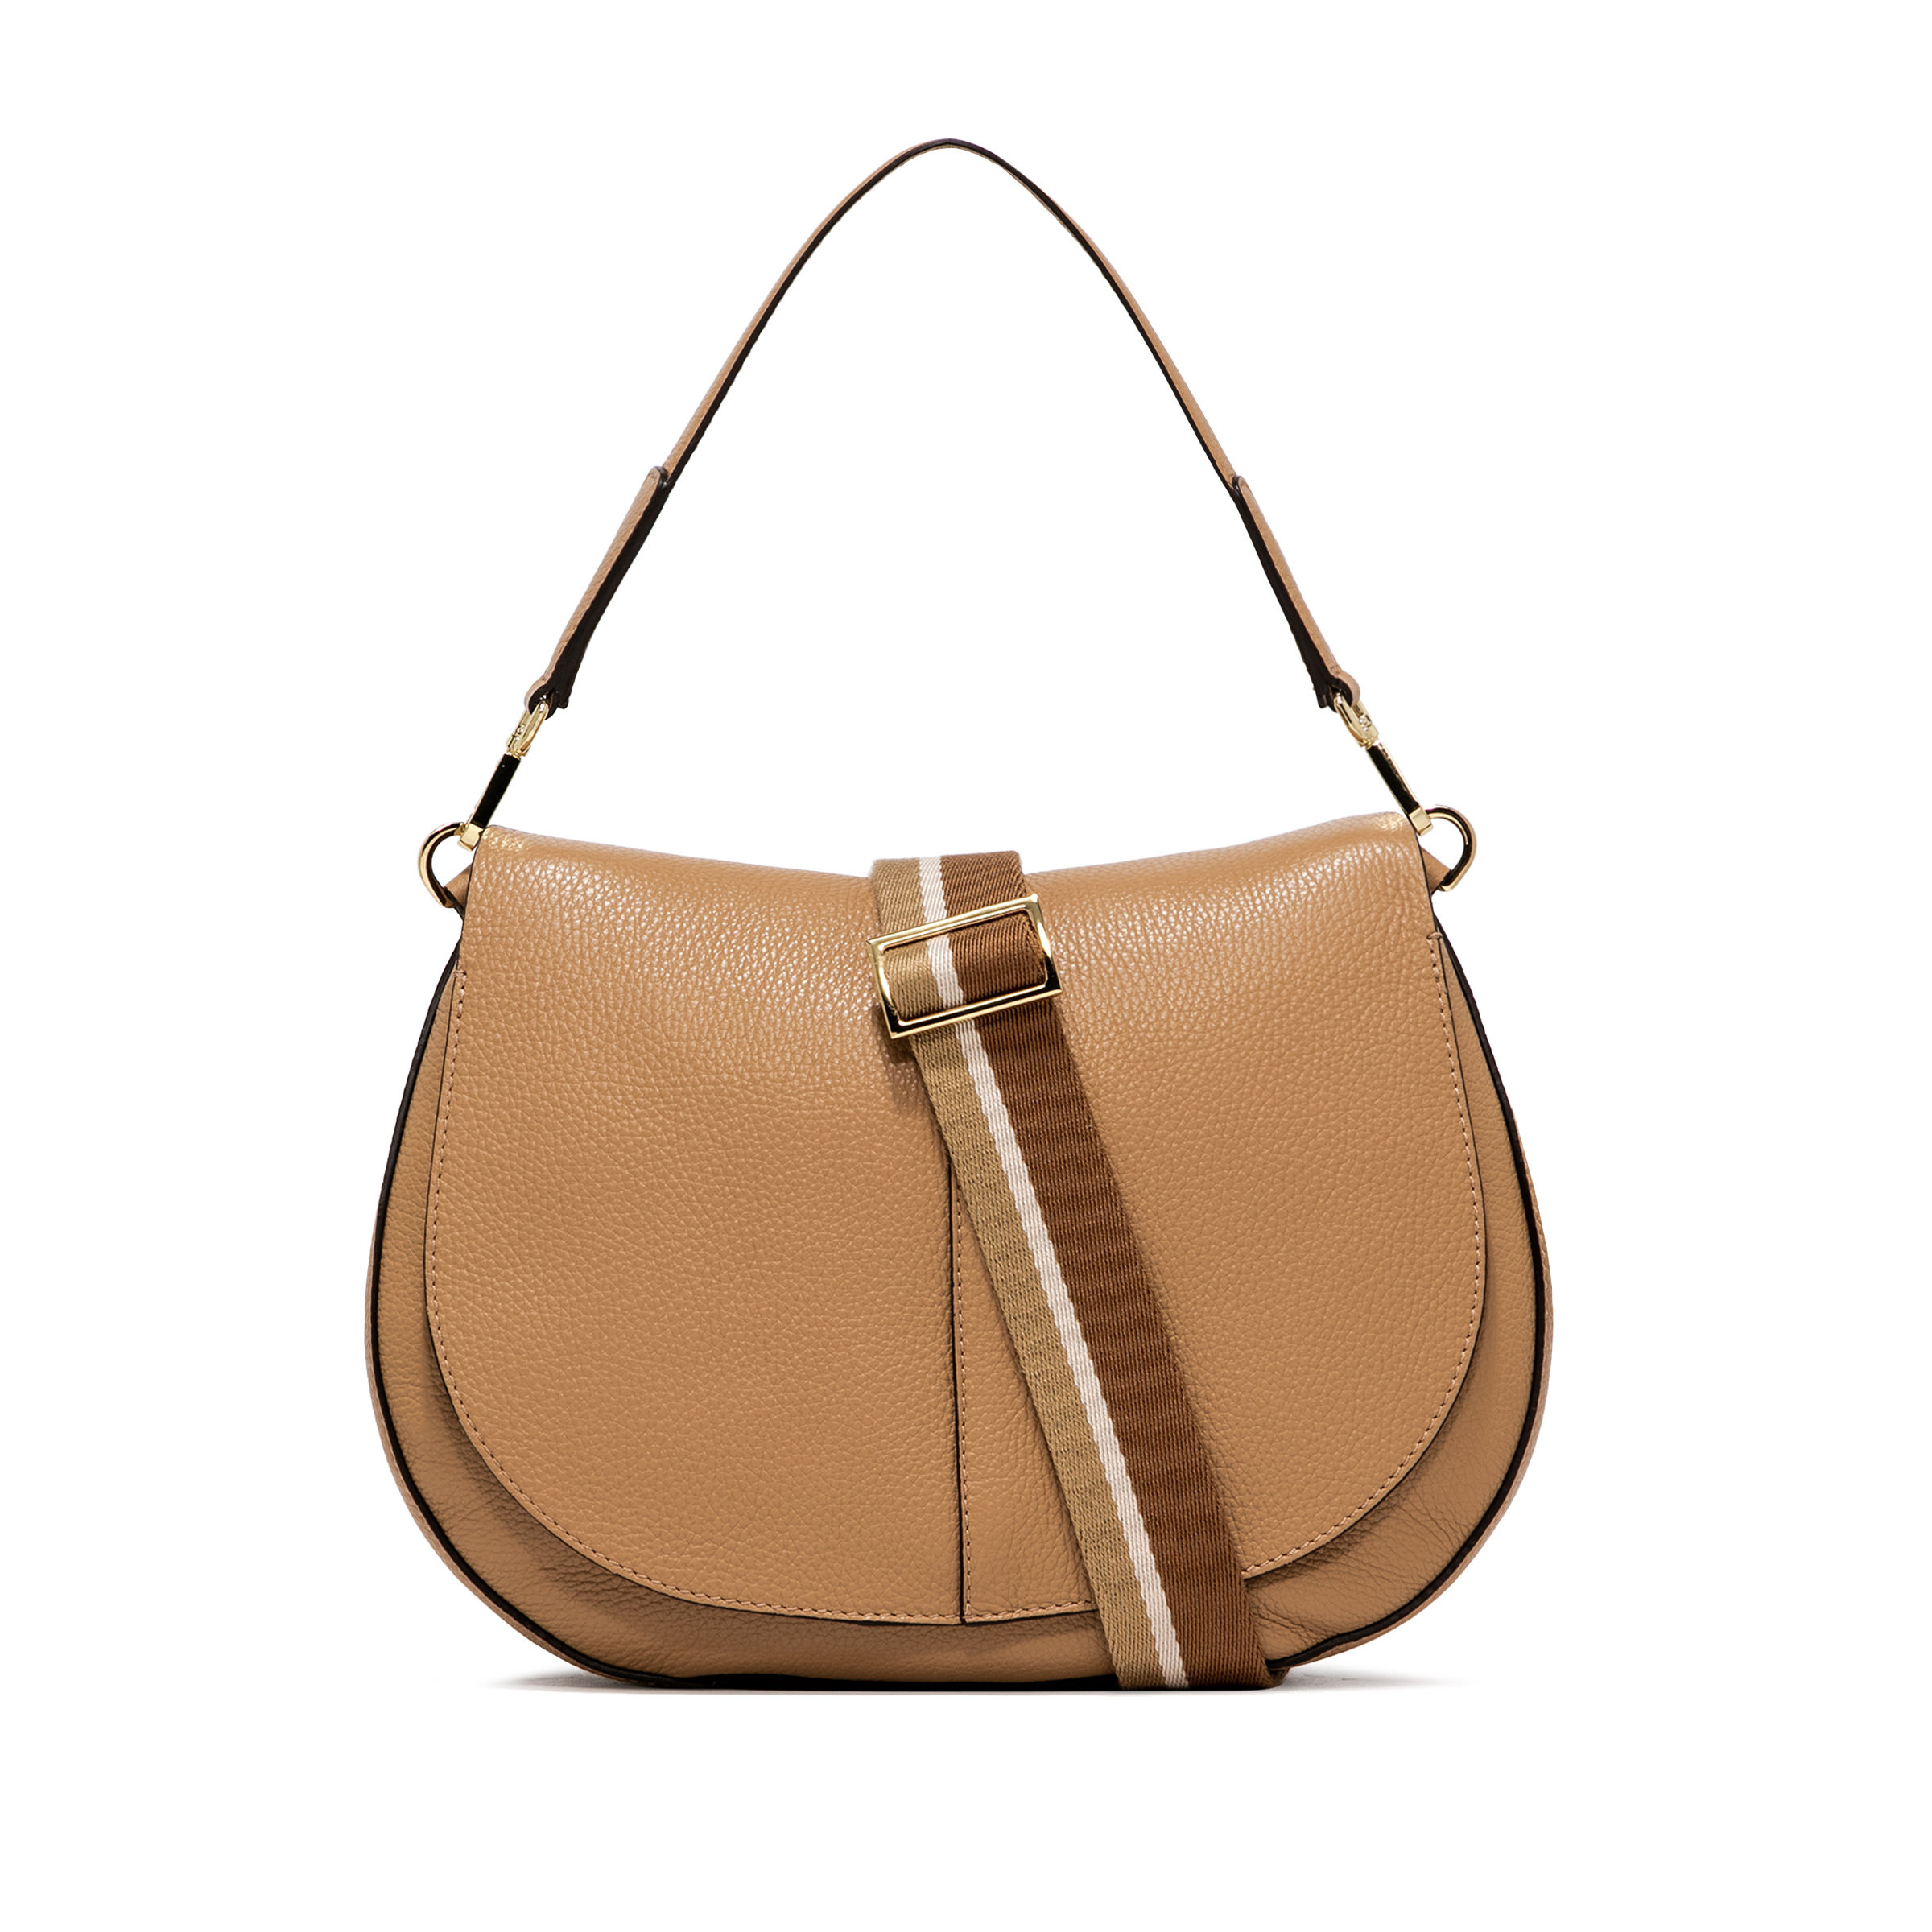 Gianni Chiarini - Helena Round bag in leather, Natural, large image number 1